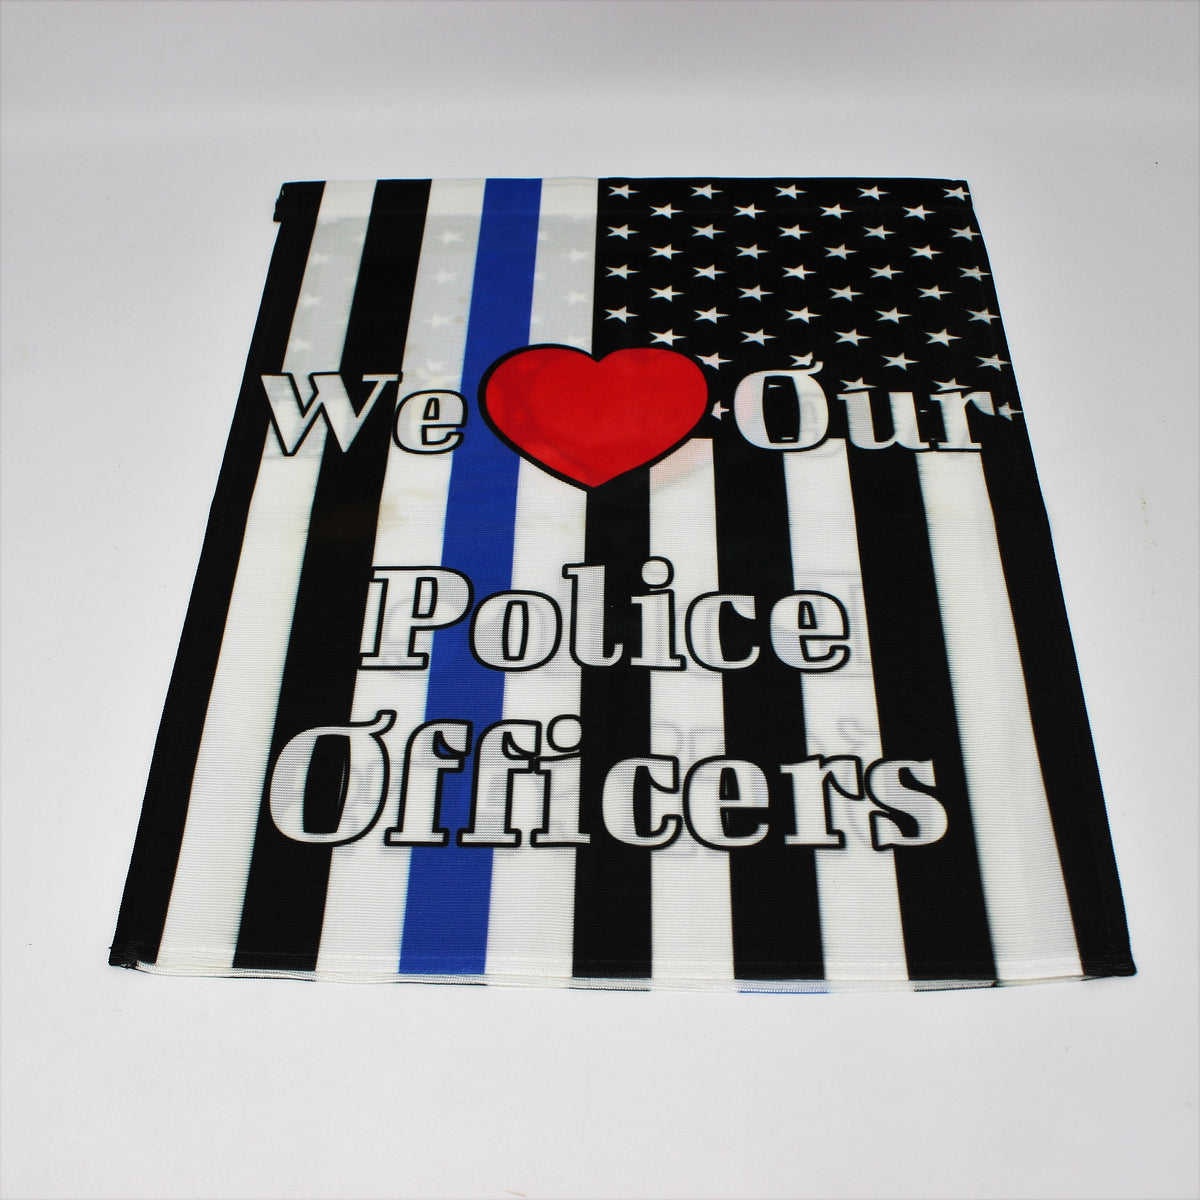 Yard Art | Personalized Garden Flag | Custom Yard Decorations | Police | Blue Line | This and That Solutions | Personalized Gifts | Custom Home Décor